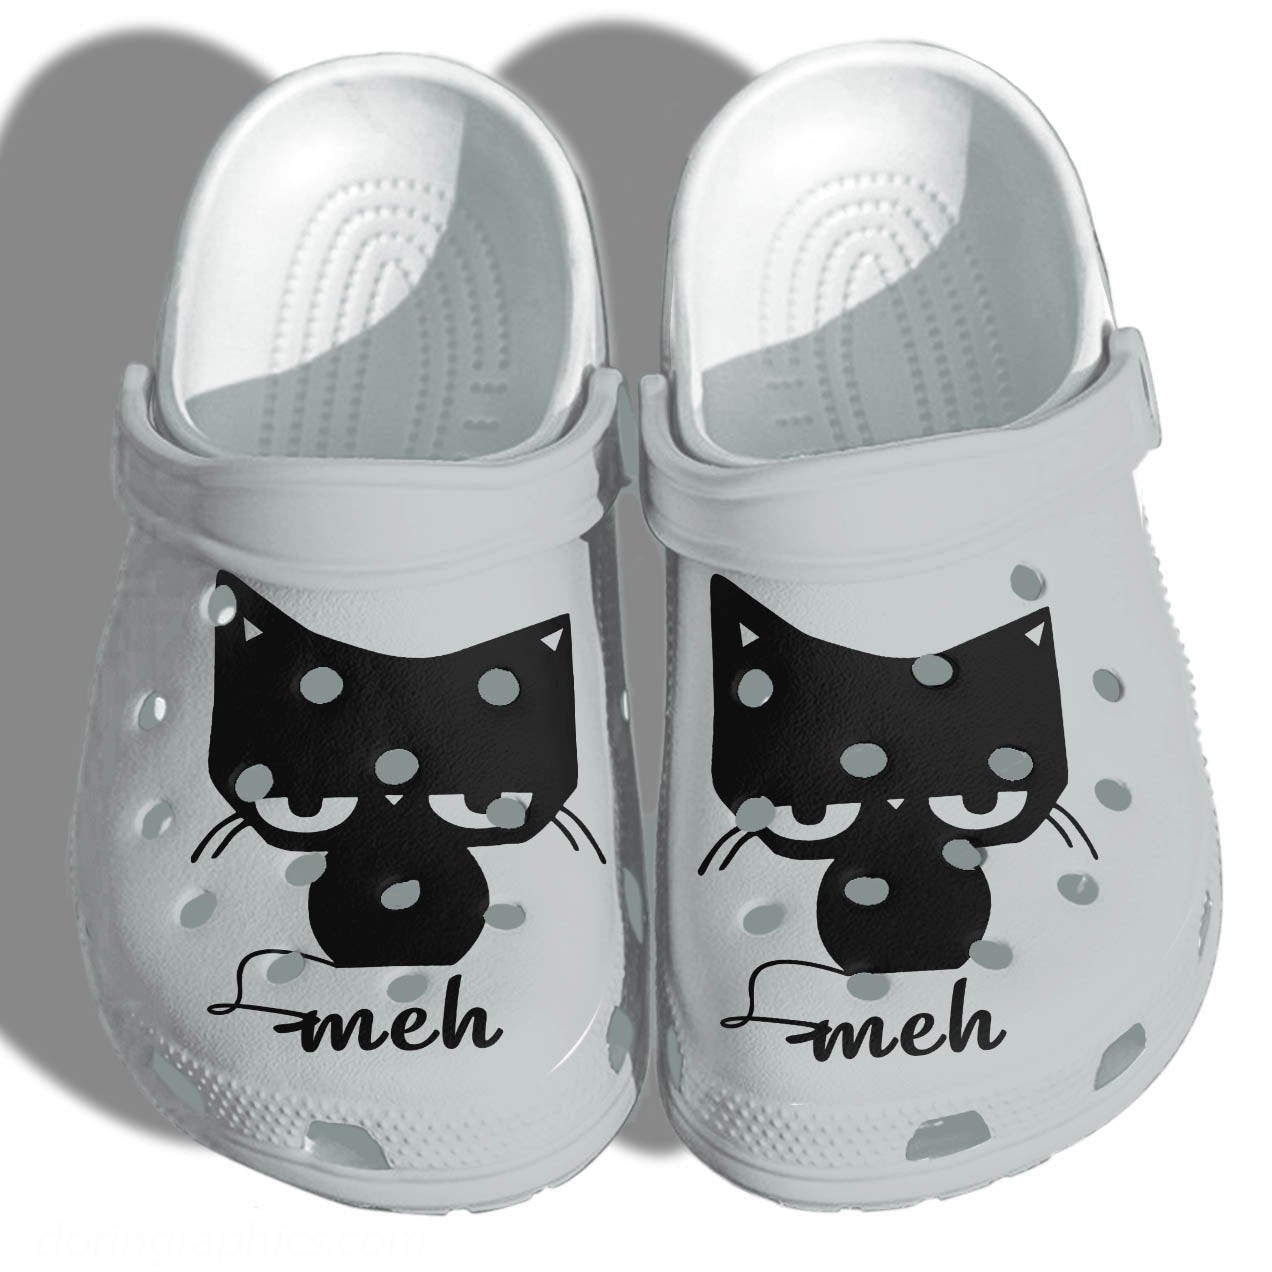 Anime Black Cat Meh Meh Funny Outdoor Crocss Shoes Clogs - Cat Cute Love Custom Crocss Shoes Clogs Gifts